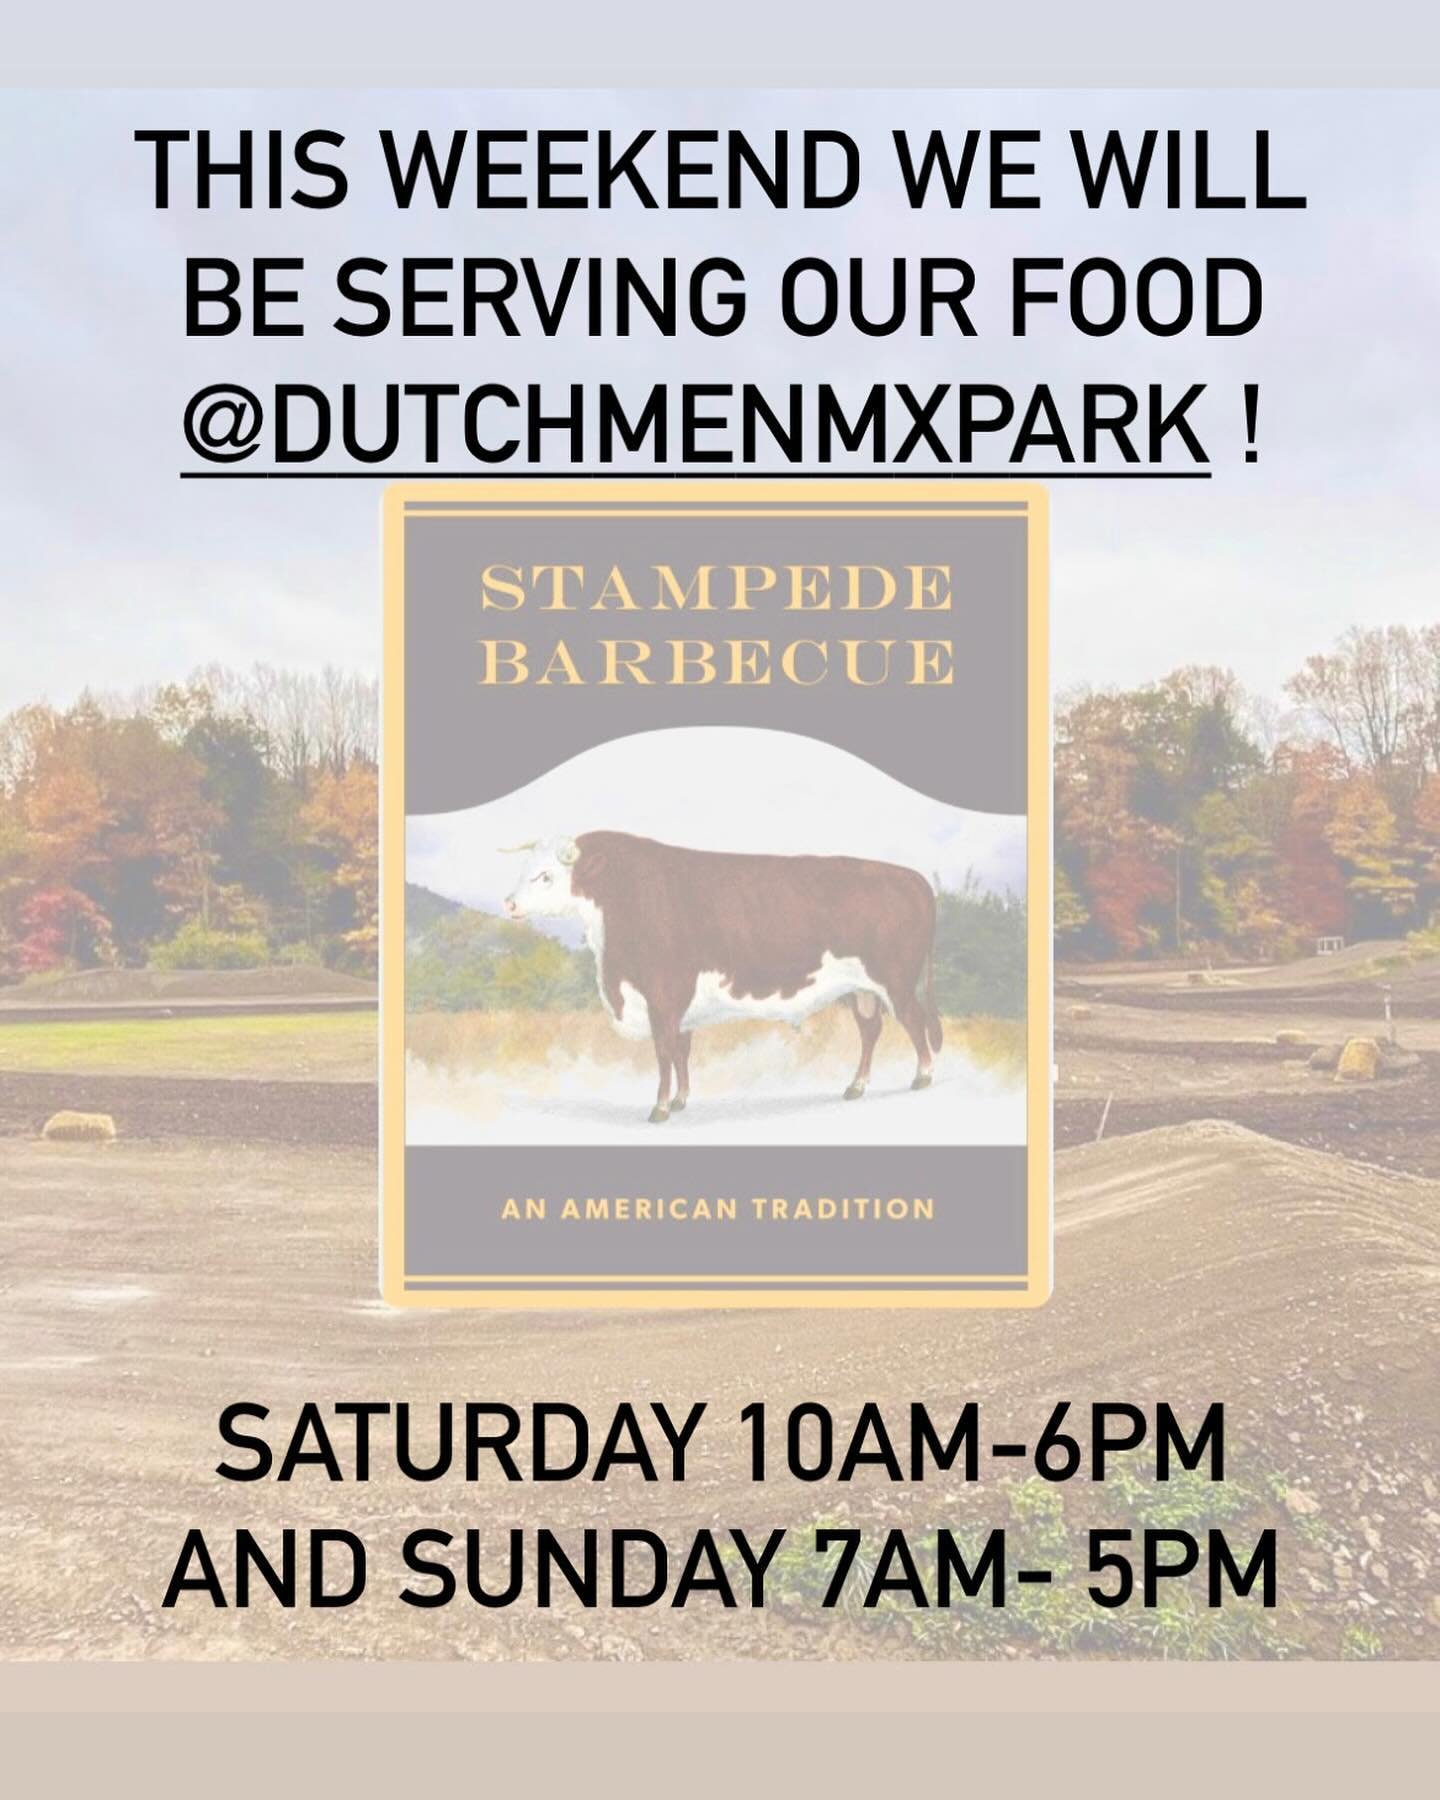 We&rsquo;re excited to be serving again @dutchmenmxpark this weekend! Come check it out and stop by and visit us for some barbecue!